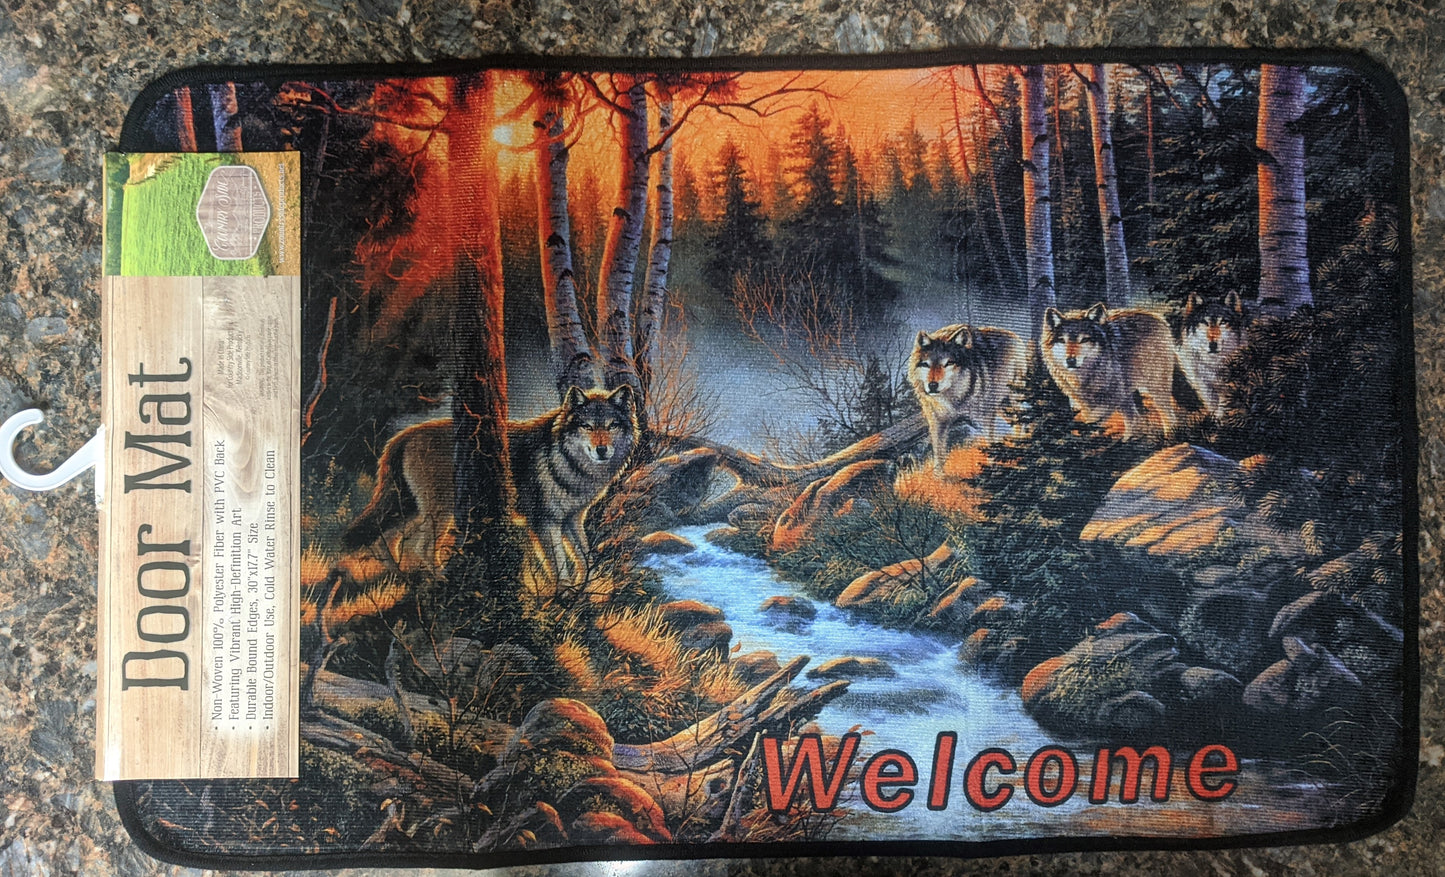 Wolf Door Mat 30"x17.7" Polyester with PVC Backing